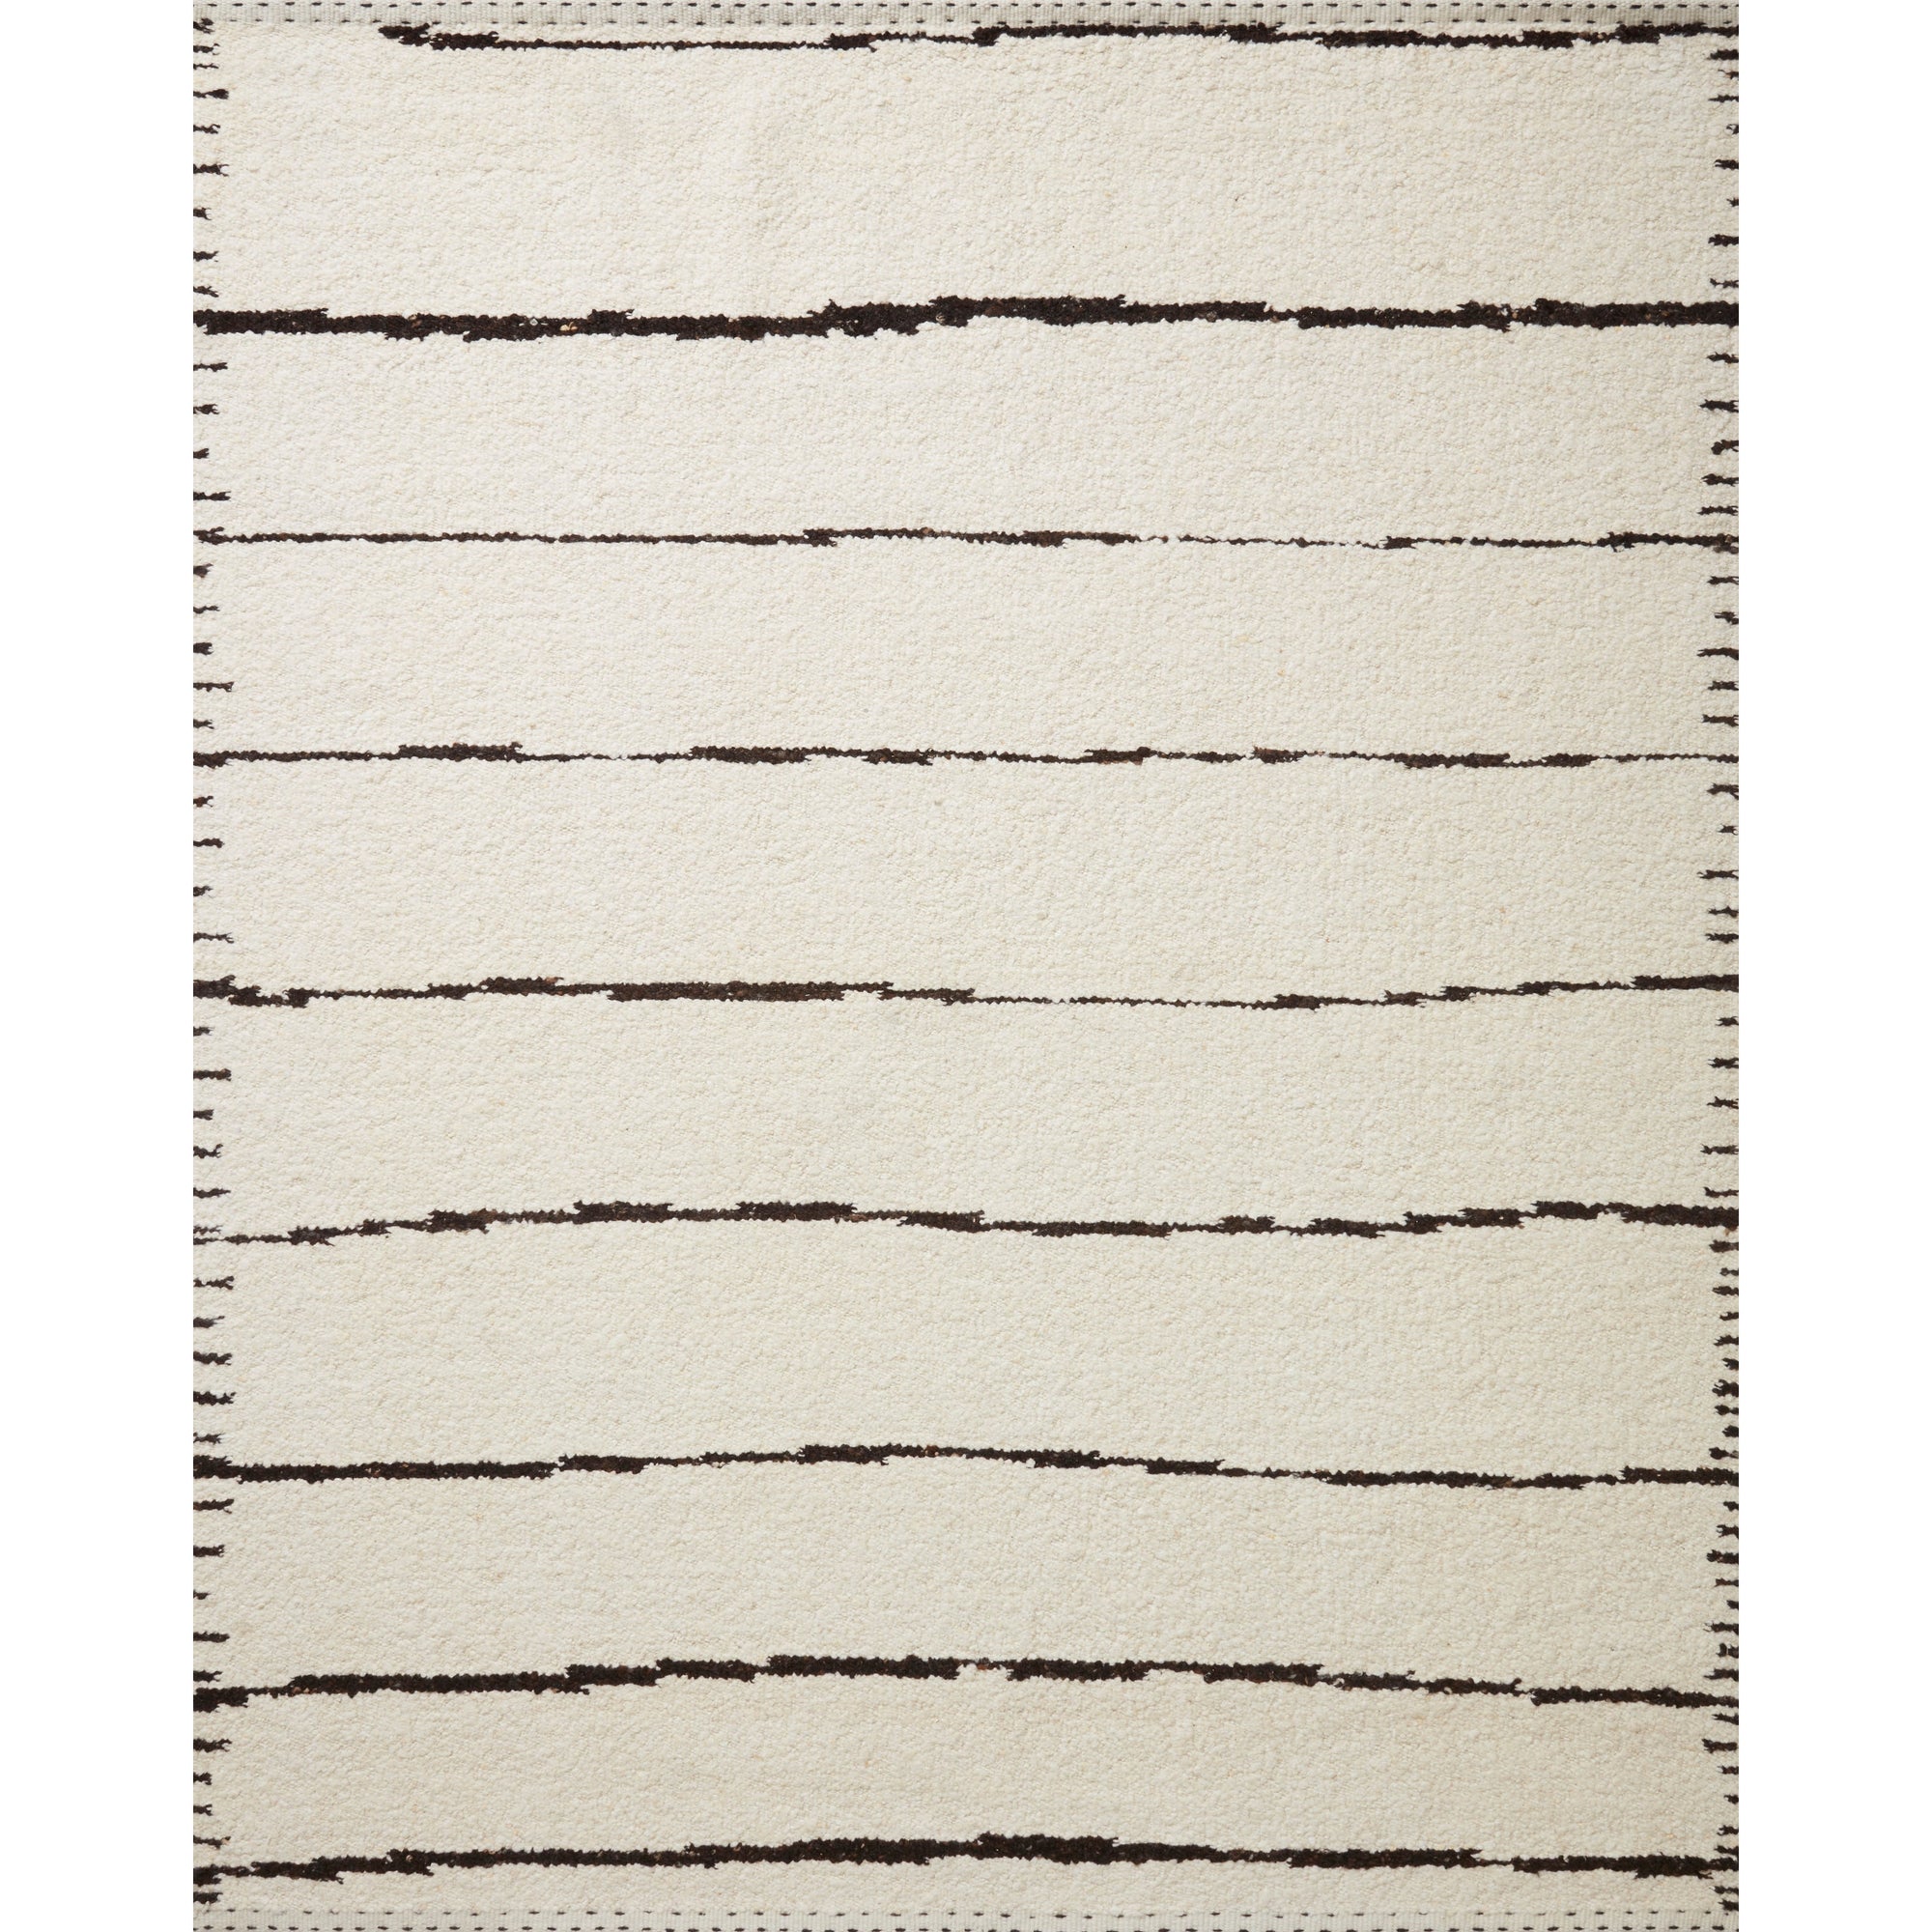 Rugs by Roo Loloi Roman Ivory Black Area Rug in size 18" x 18" Sample